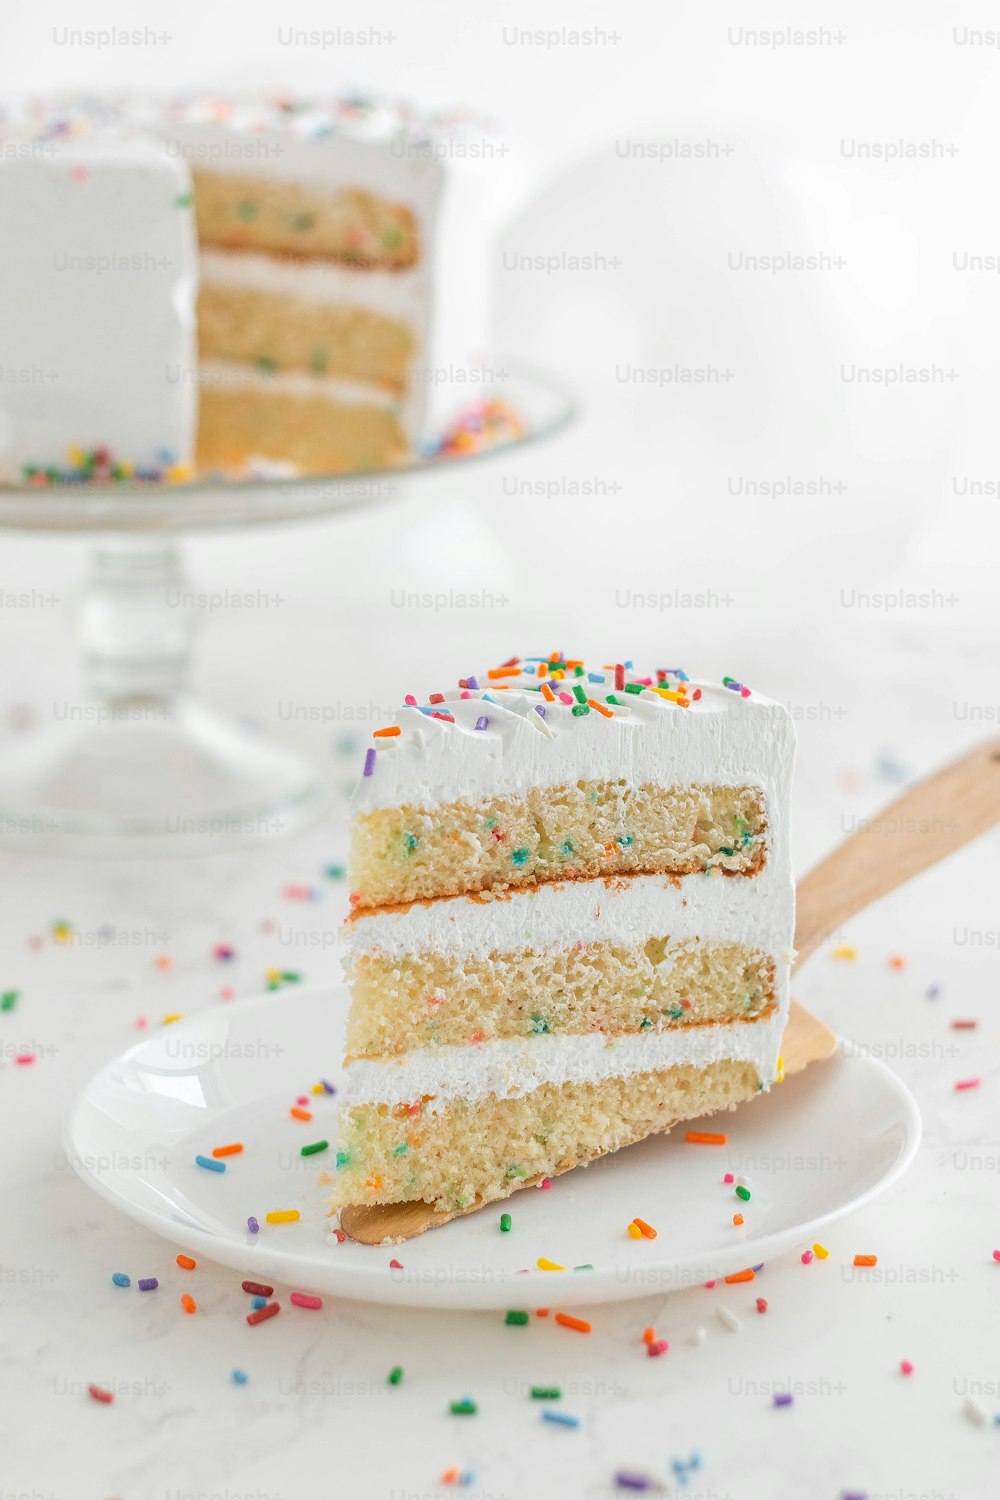 a slice of cake with white frosting and sprinkles on a plate